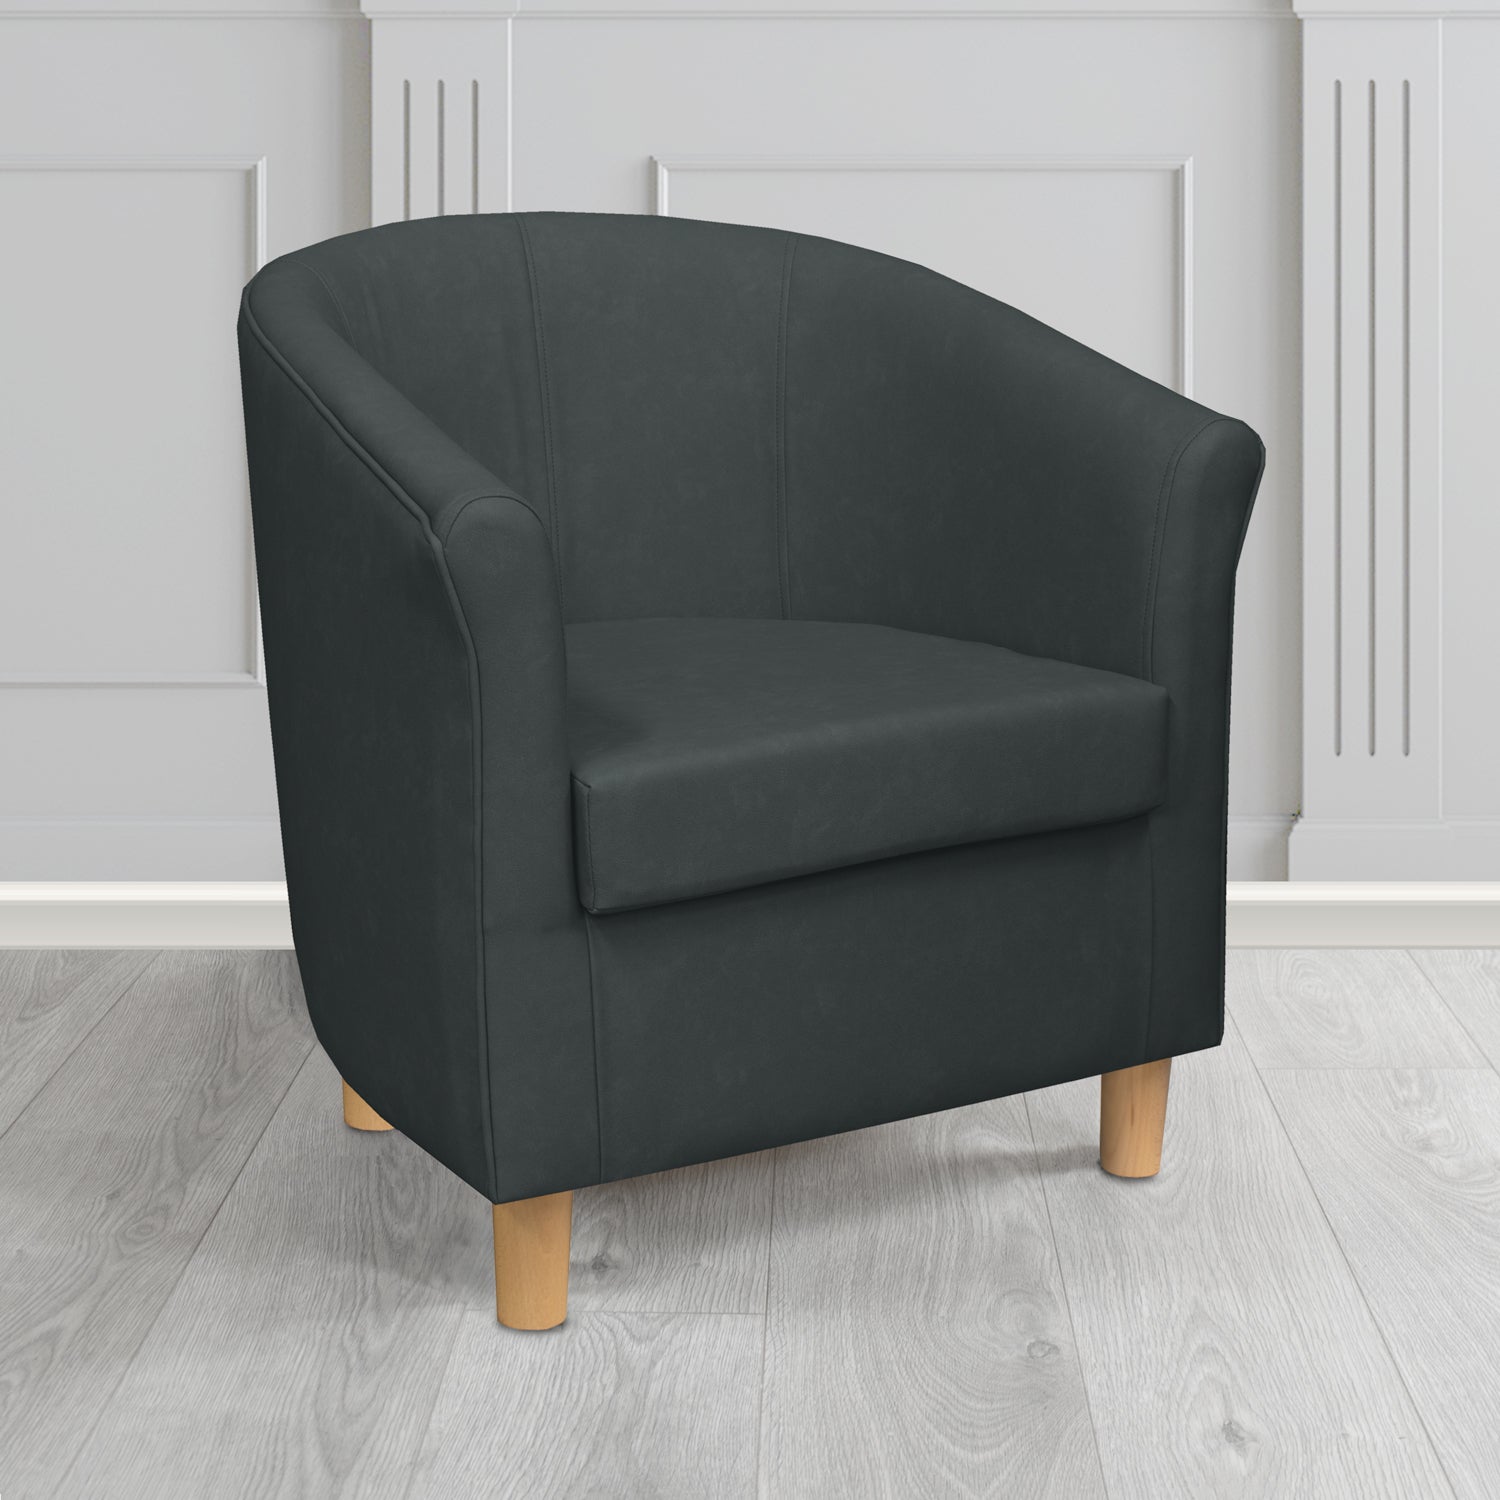 Tuscany Tub Chair in Infiniti Noir INF1863 Antimicrobial Crib 5 Faux Leather - The Tub Chair Shop